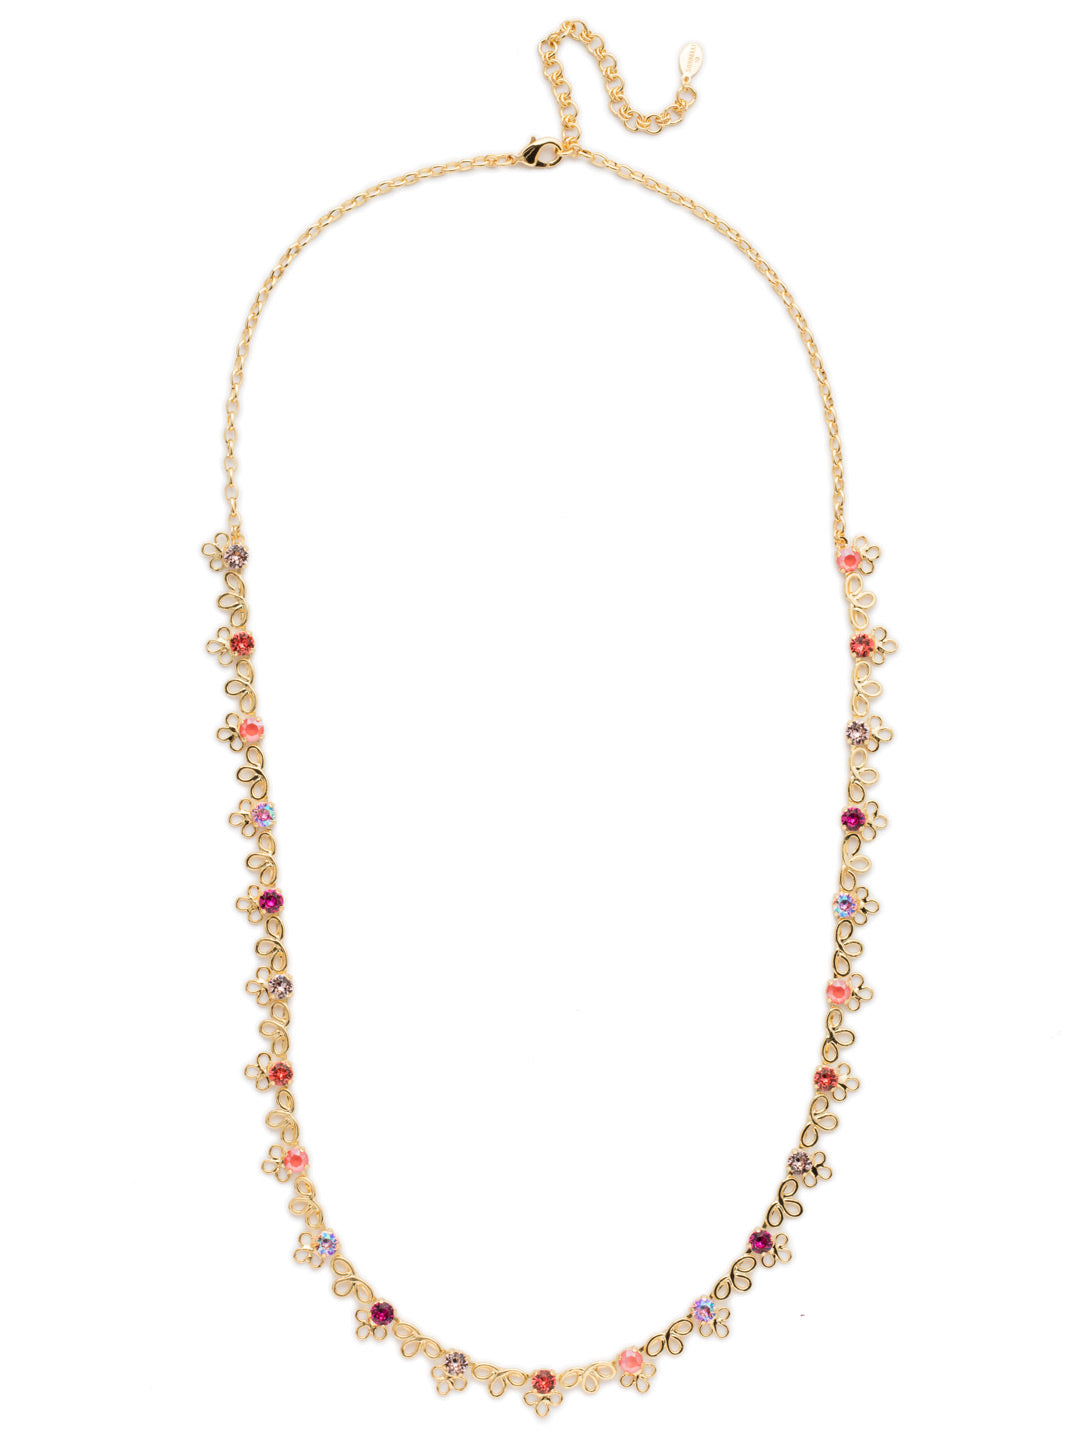 Zahara Long Necklace - NES14BGBGA - <p>The Zahara Long Necklace is perfect for layering on a taste of spring style, featuring beautiful hand-soldered metalwork shining with sparkling crystals. From Sorrelli's Begonia collection in our Bright Gold-tone finish.</p>